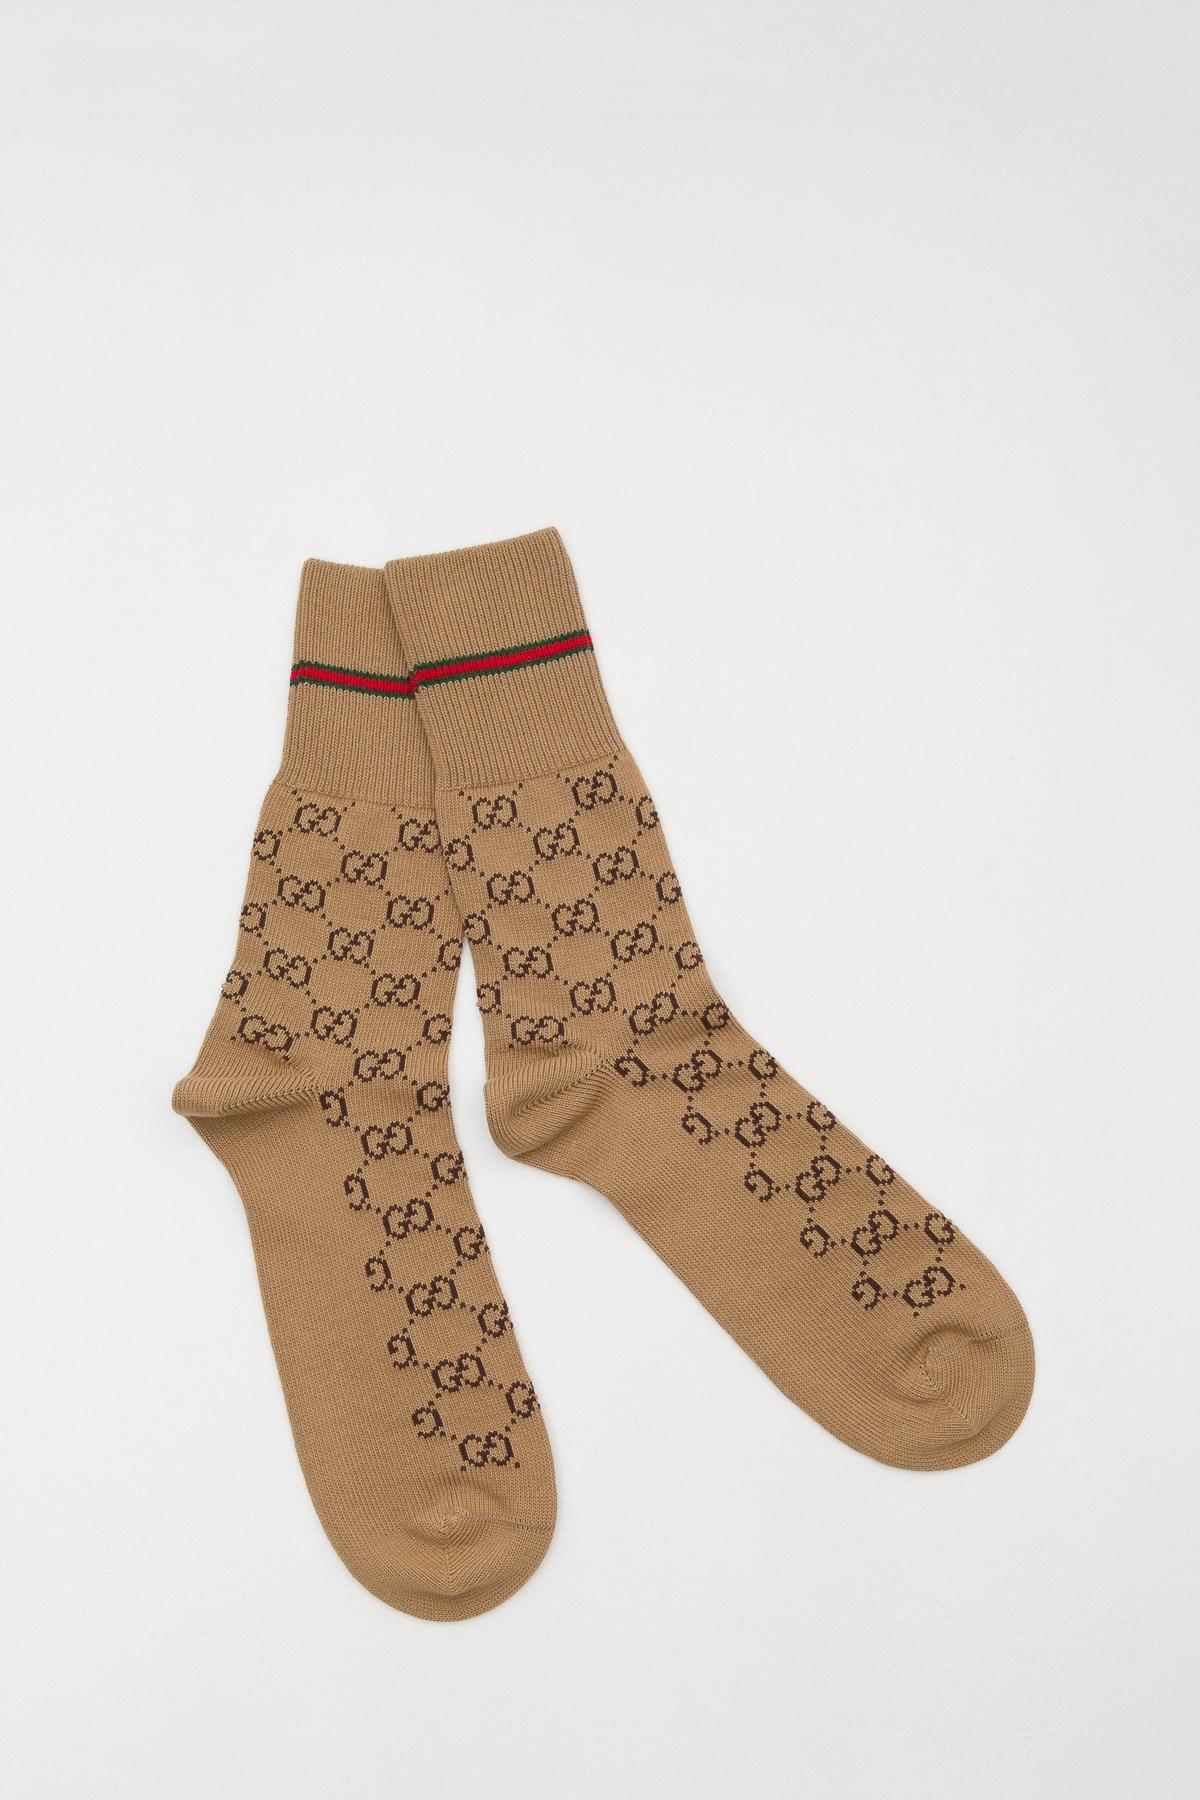 GG Cotton Socks With Web in Natural for Men - Lyst